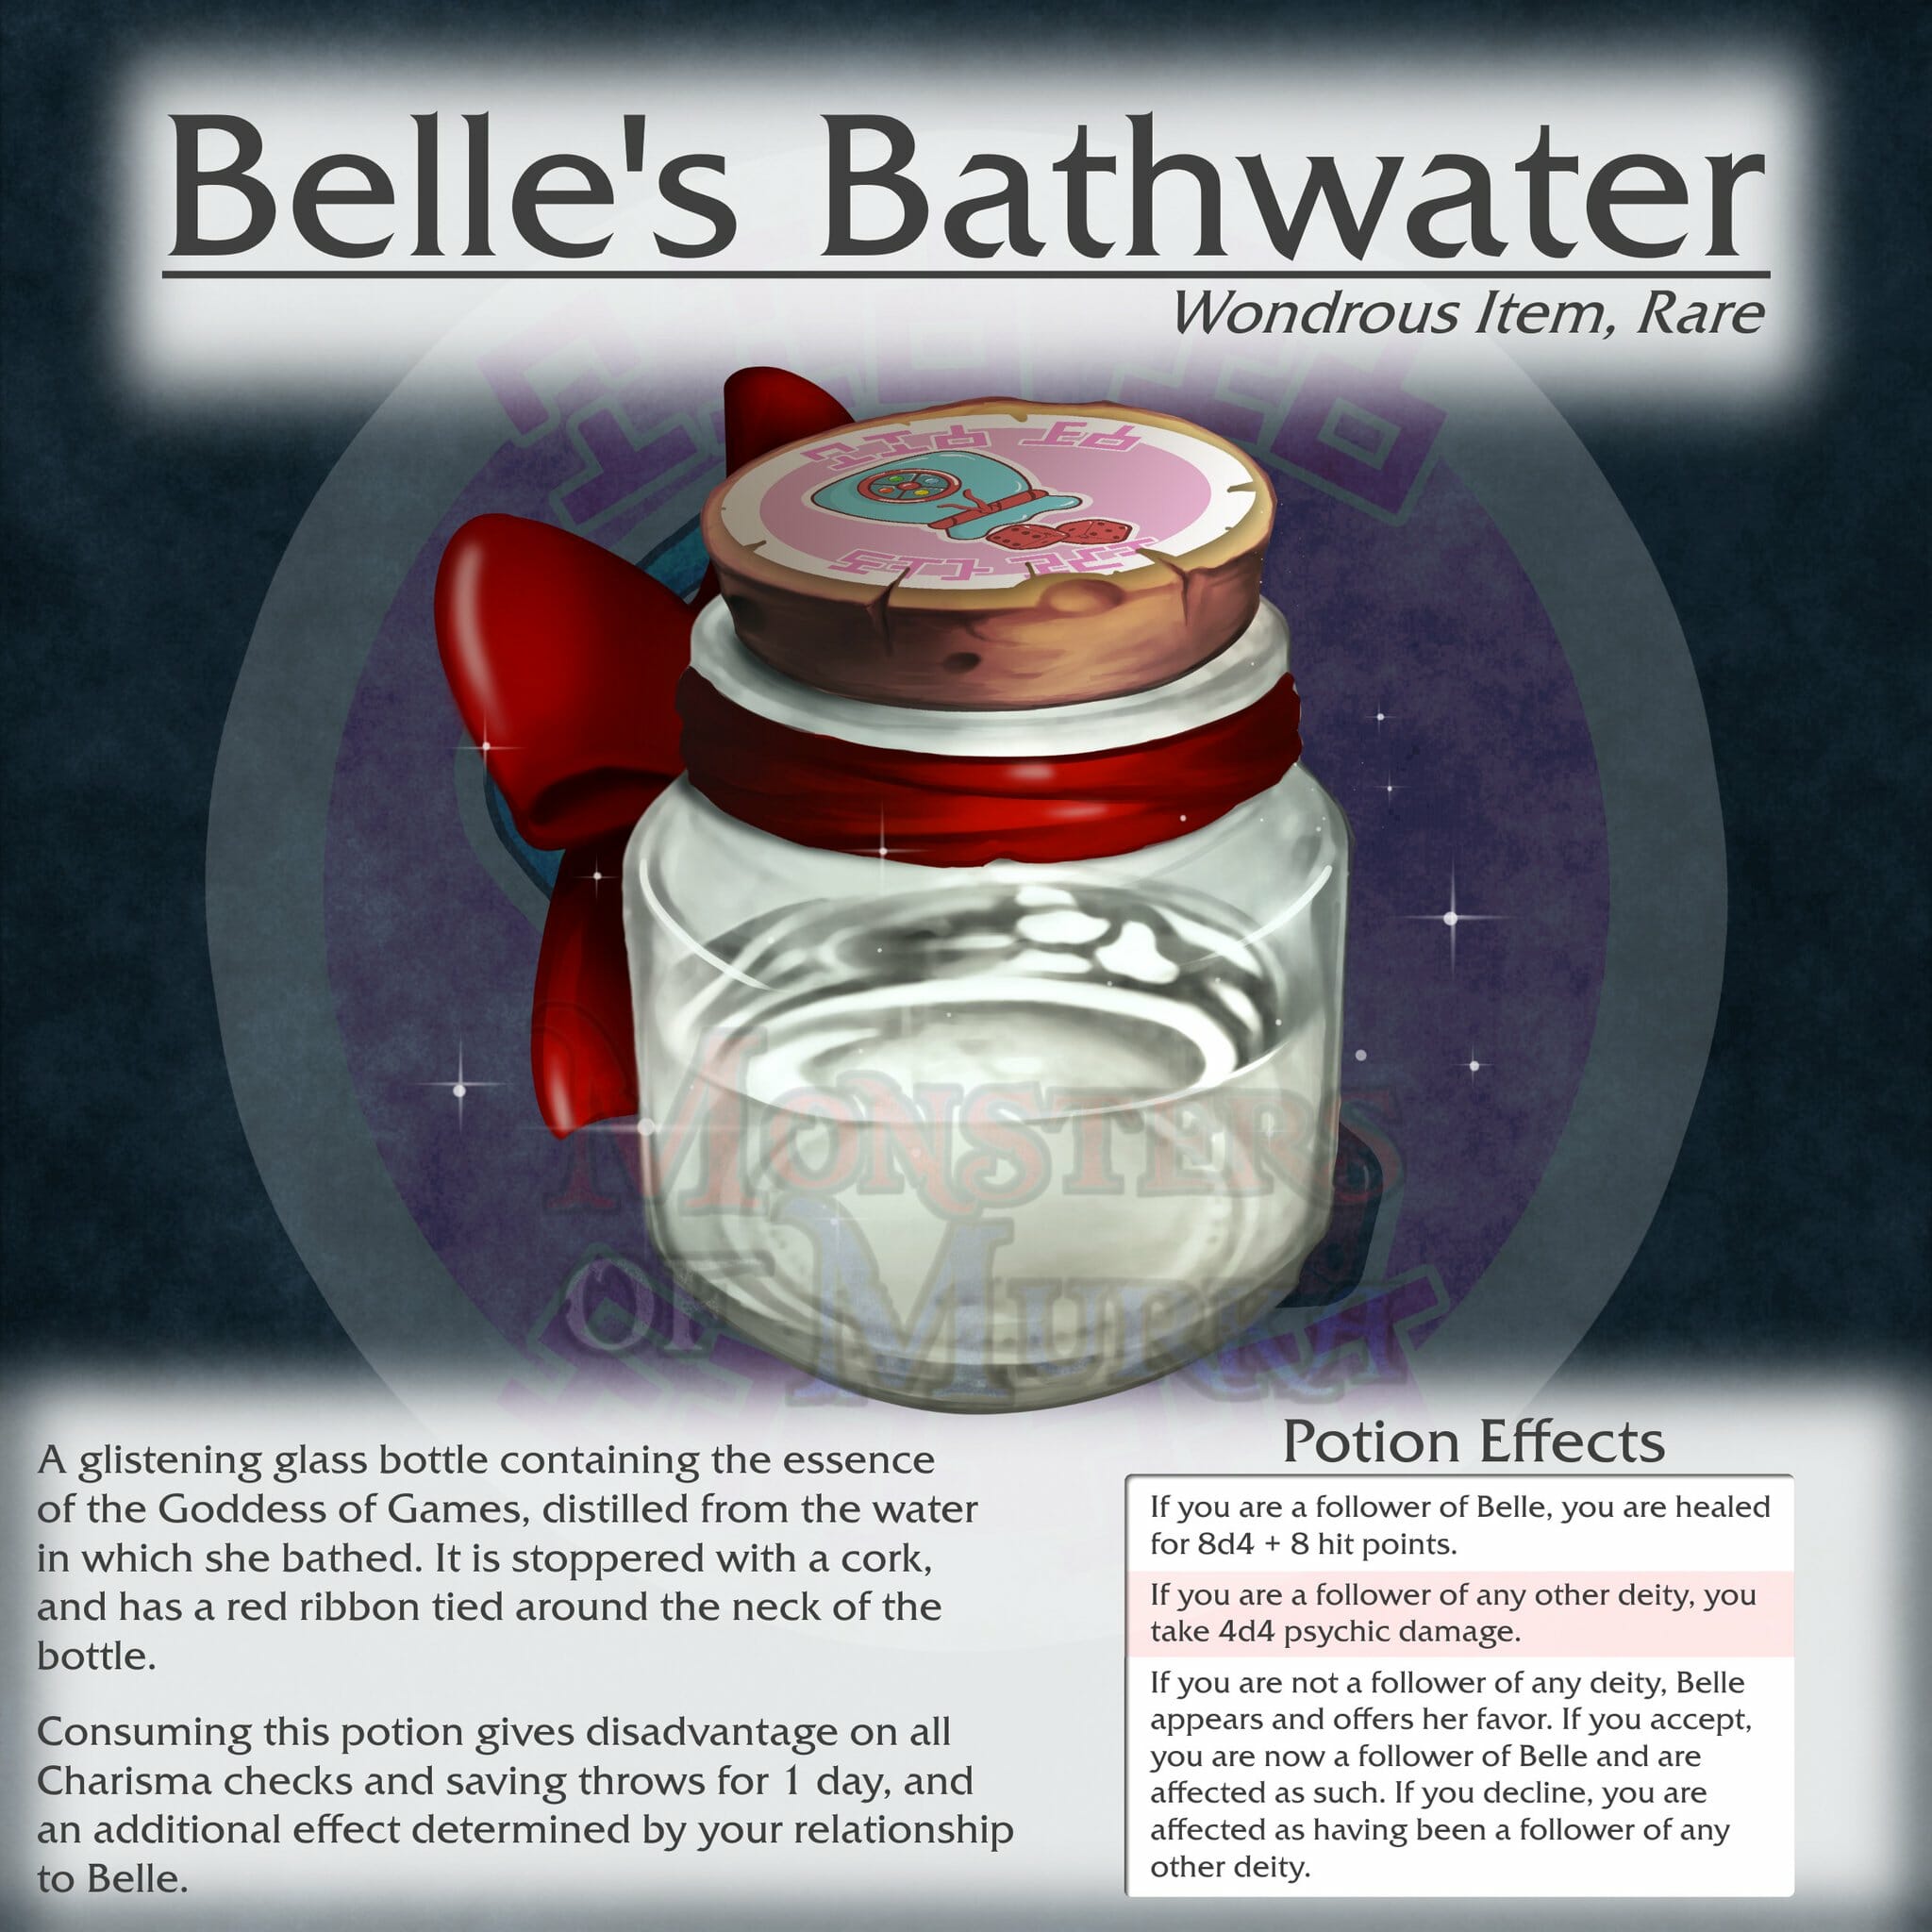 Belle Delphine is selling her bath water and is getting explicit requests